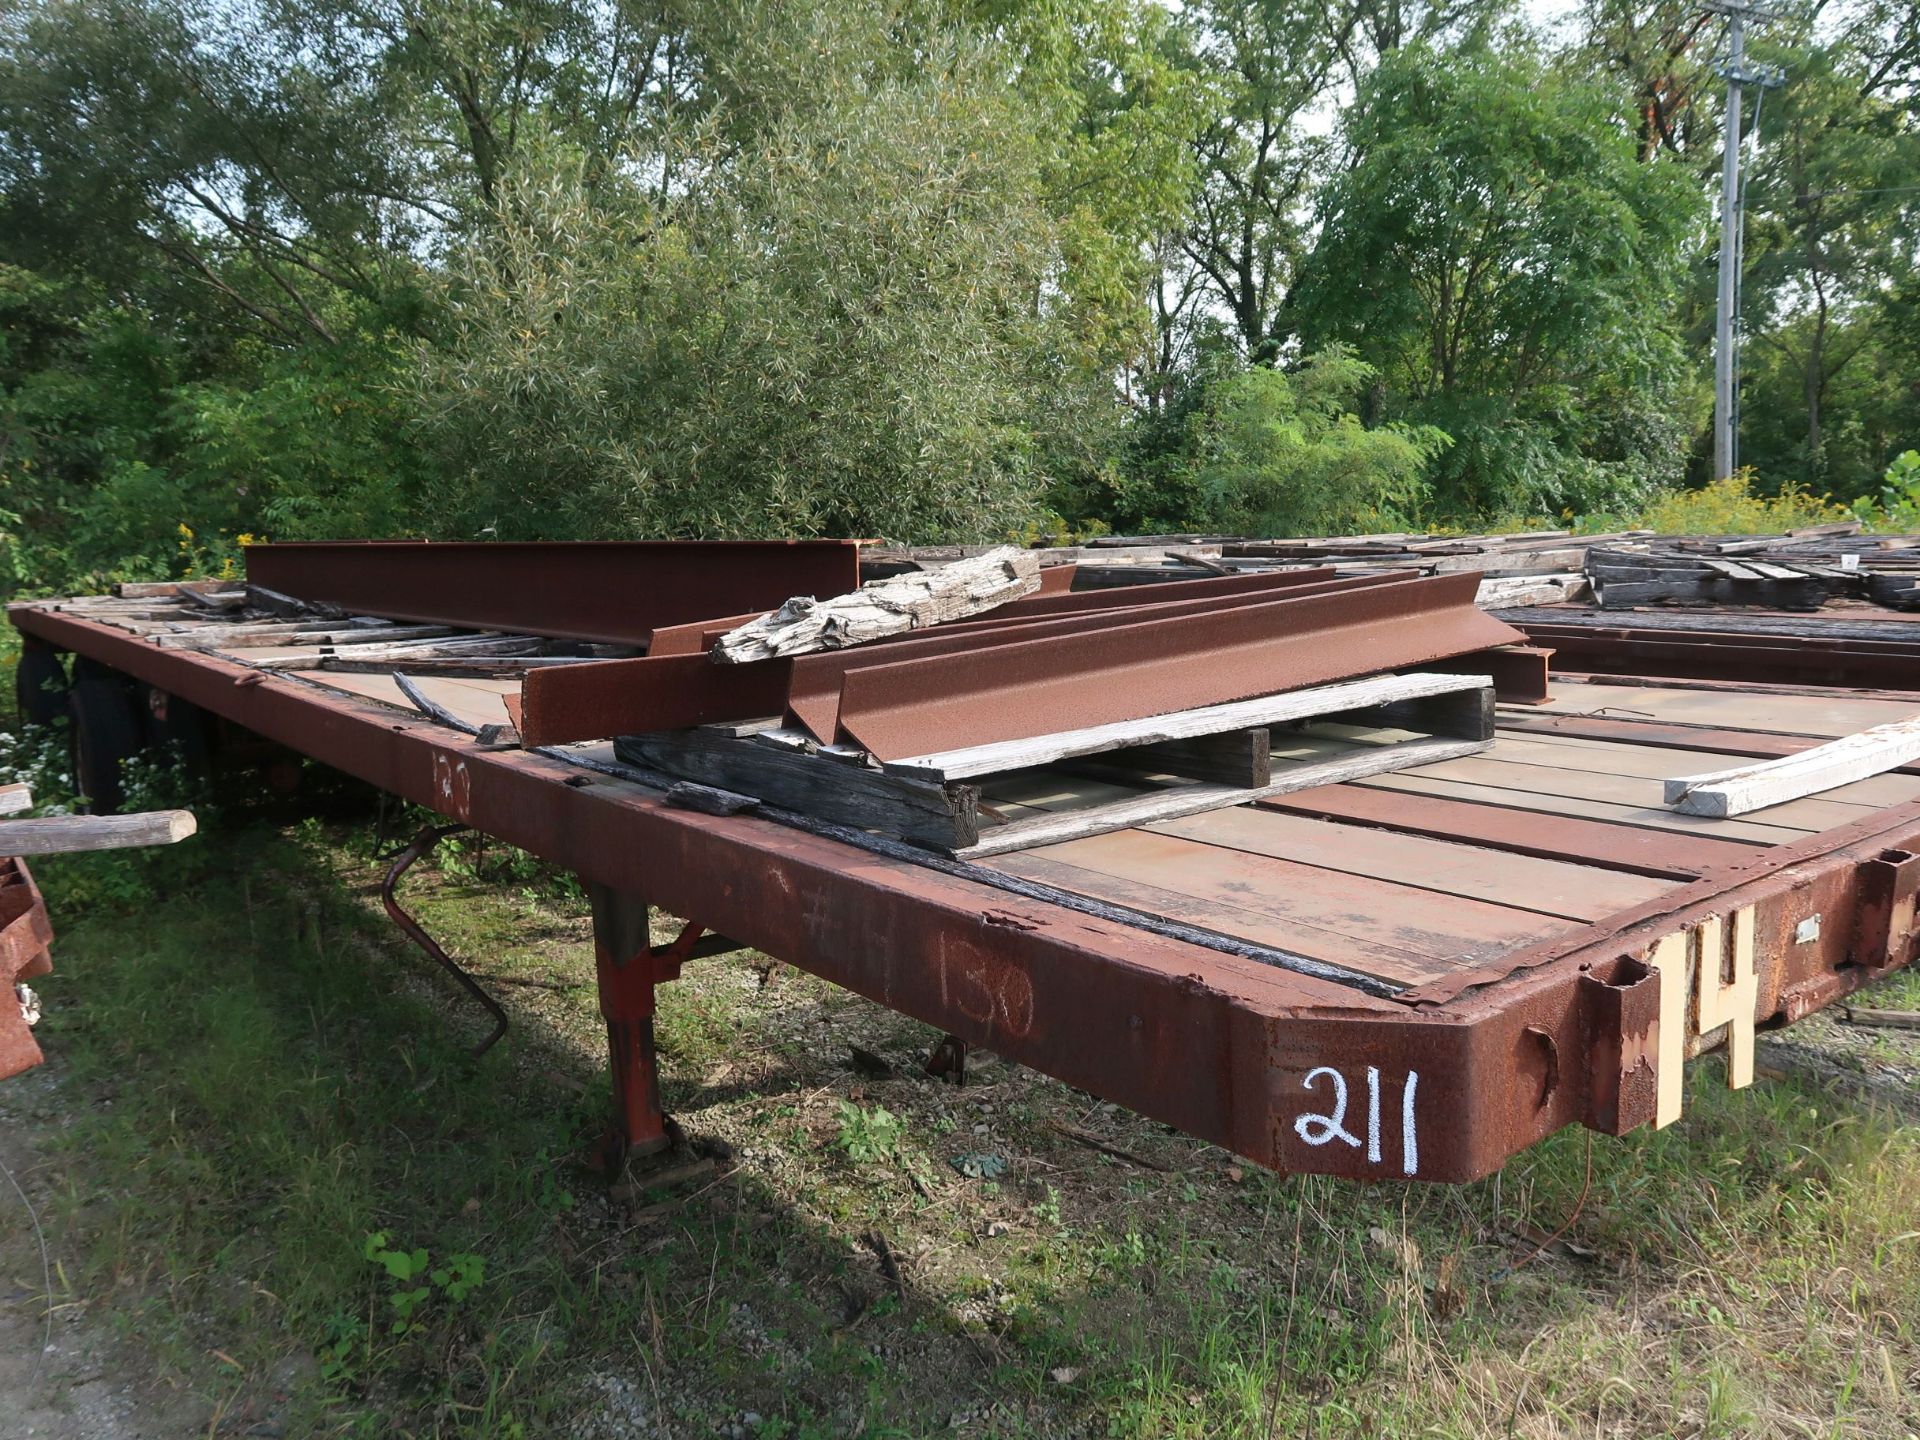 APPROX. 40' FLAT BED YARD TRAILER, NO. 14 (NO TITLE)